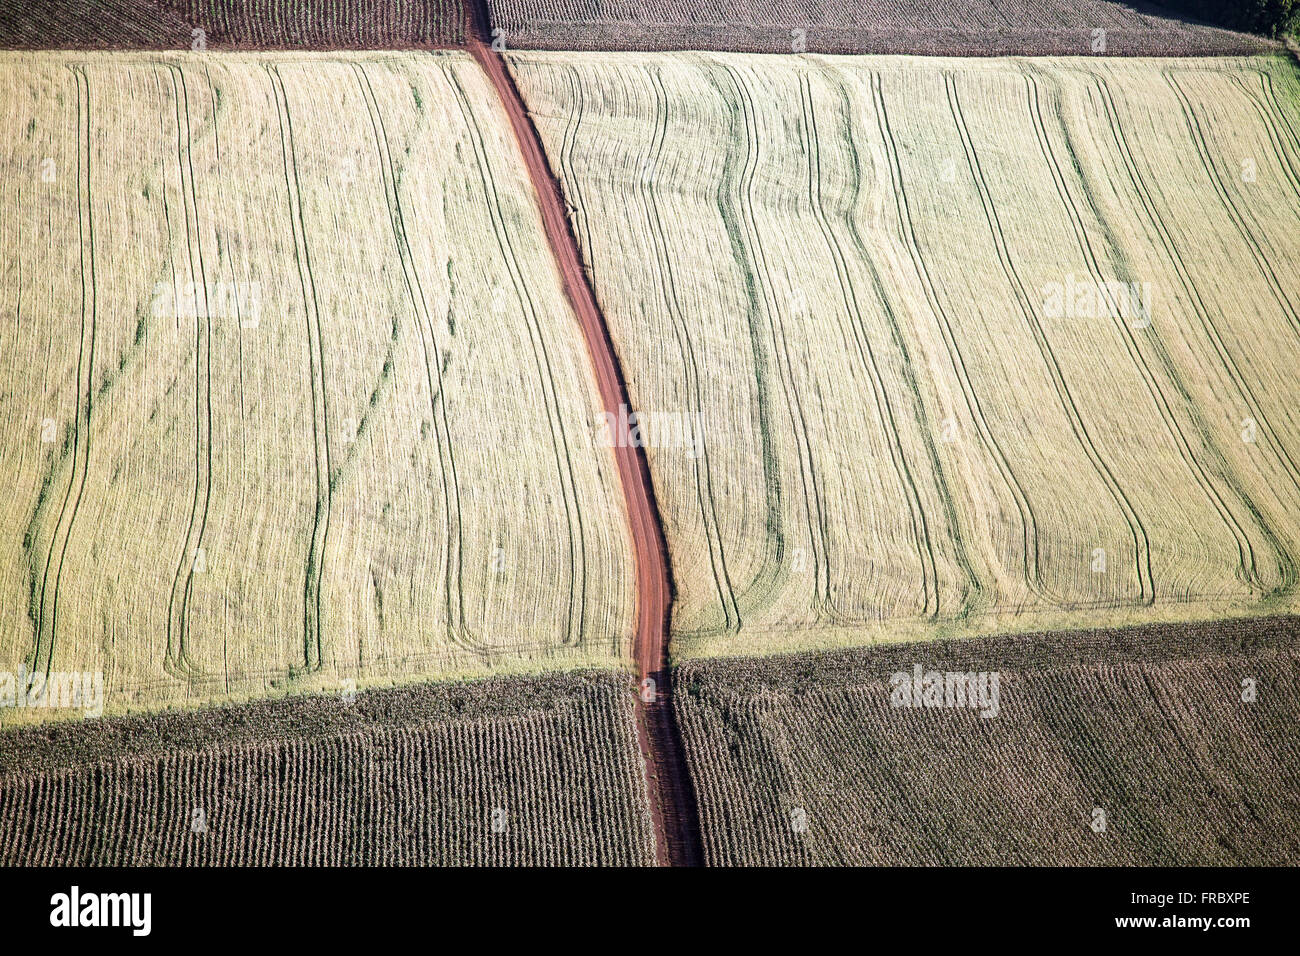 Aerial view of planting corn and wheat Stock Photo